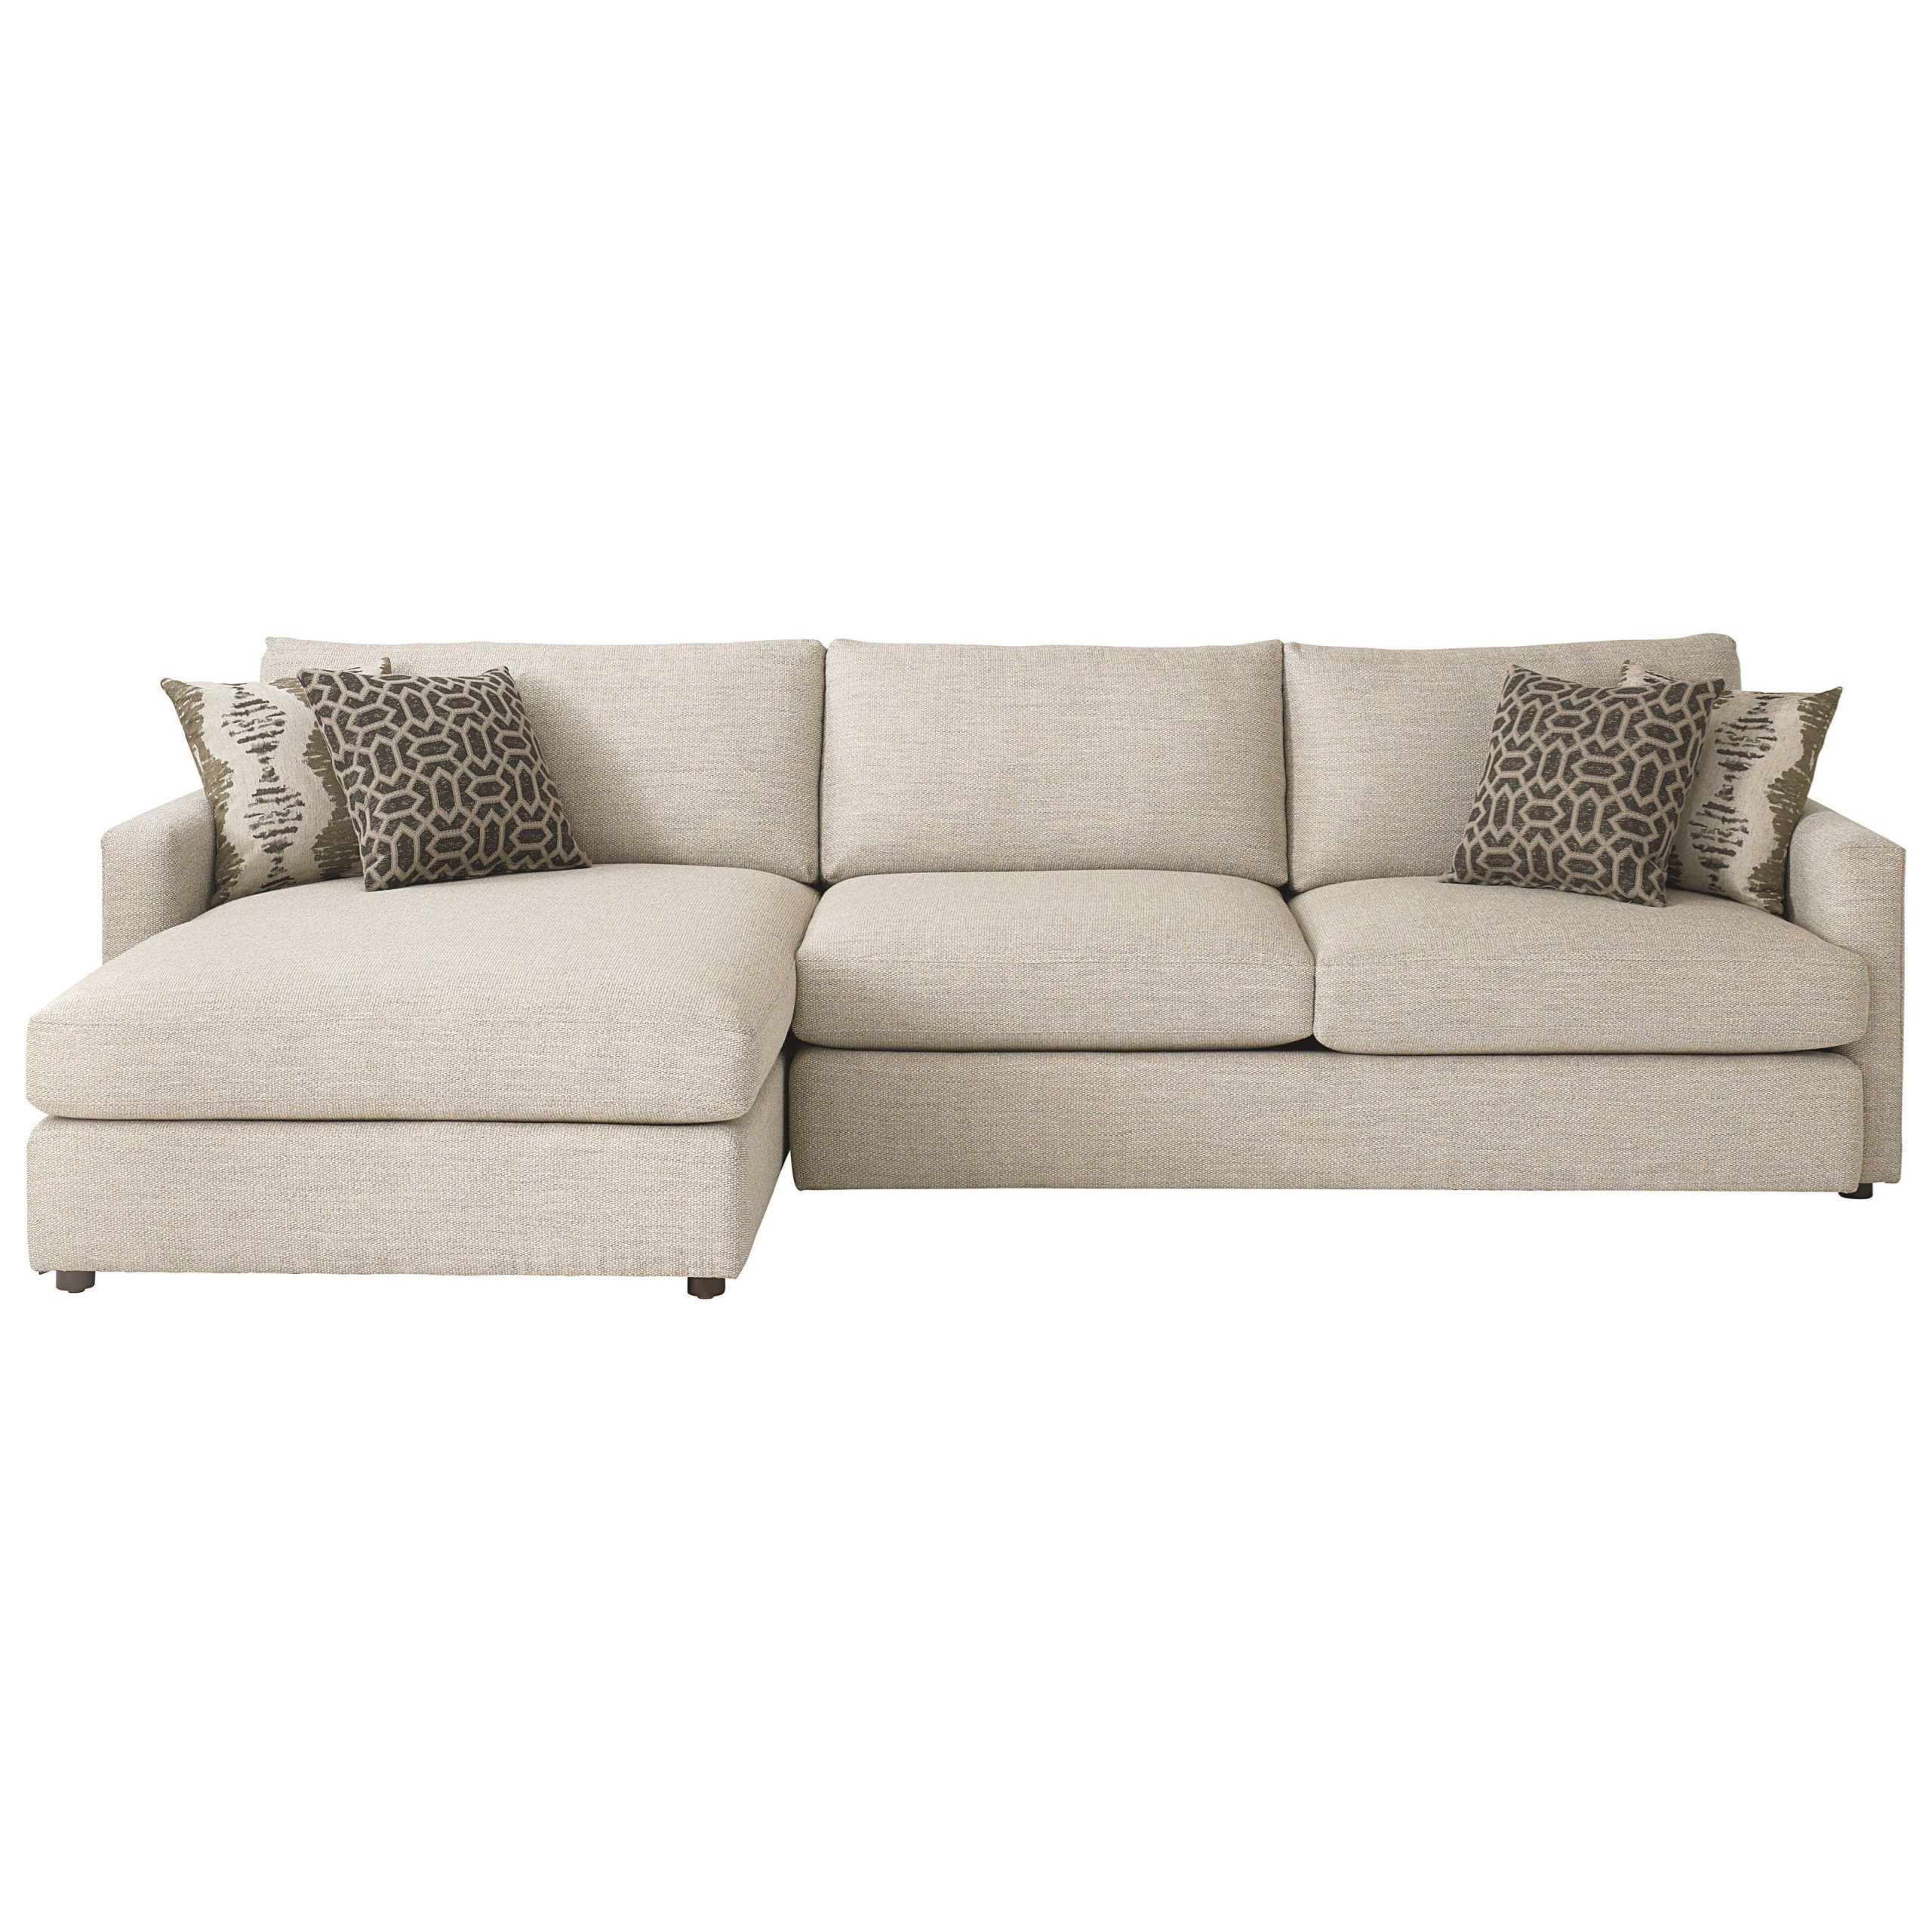 Bassett Allure Contemporary Sectional With Left Arm Facing Chaise Intended For Left Or Right Facing Sleeper Sectionals (Gallery 19 of 21)